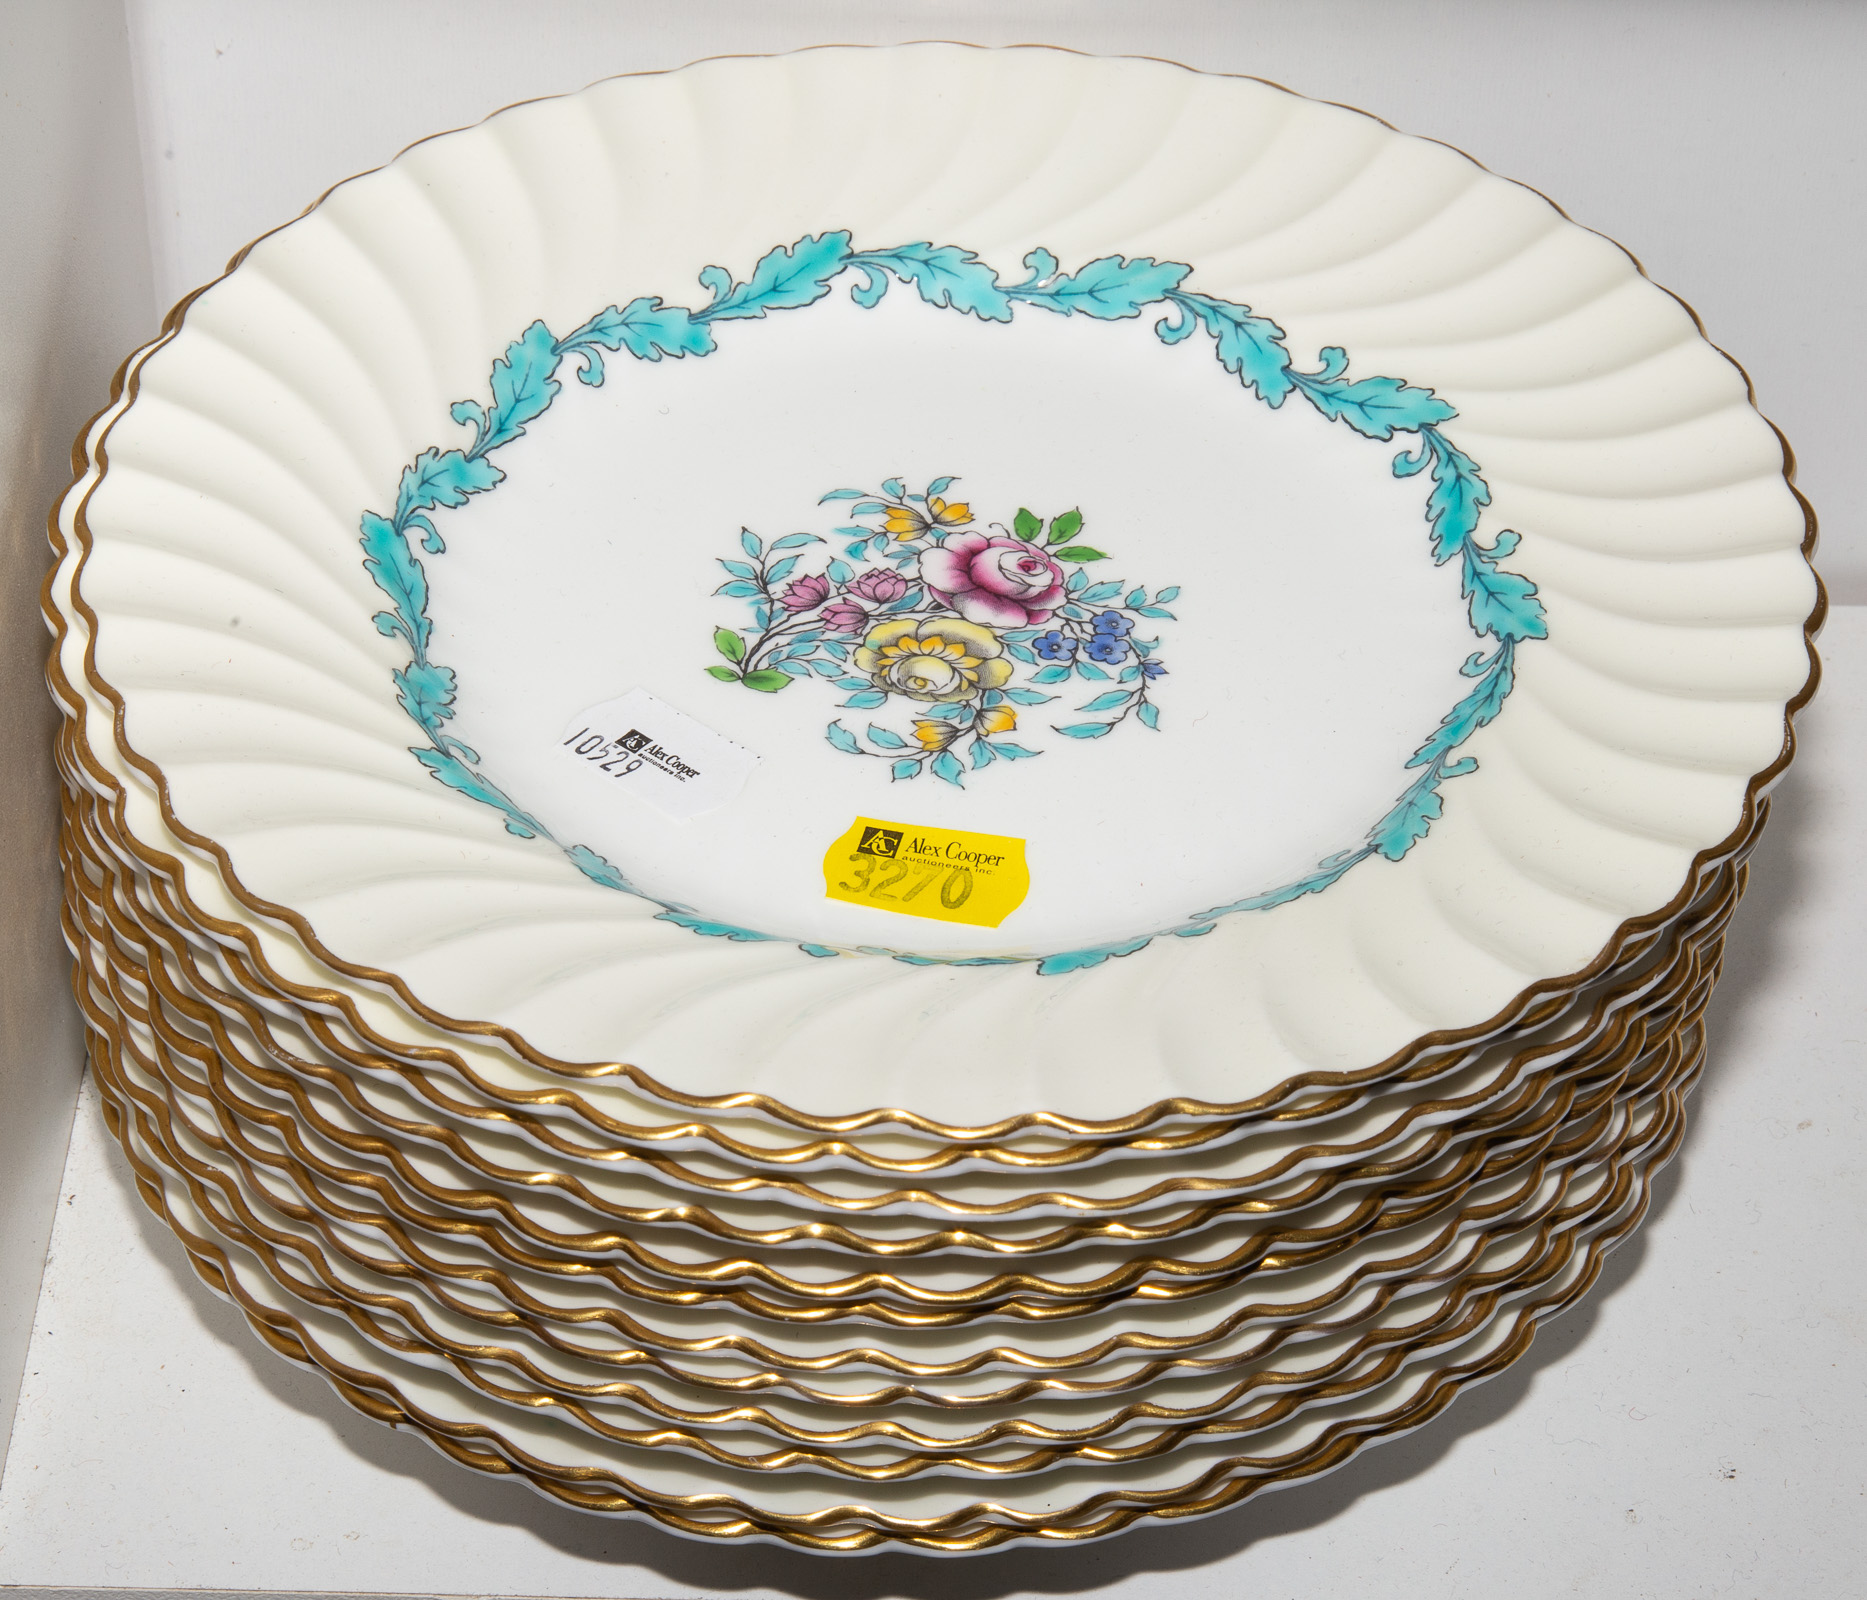 12 MINTON S ARDMORE LUNCH PLATES 33834f